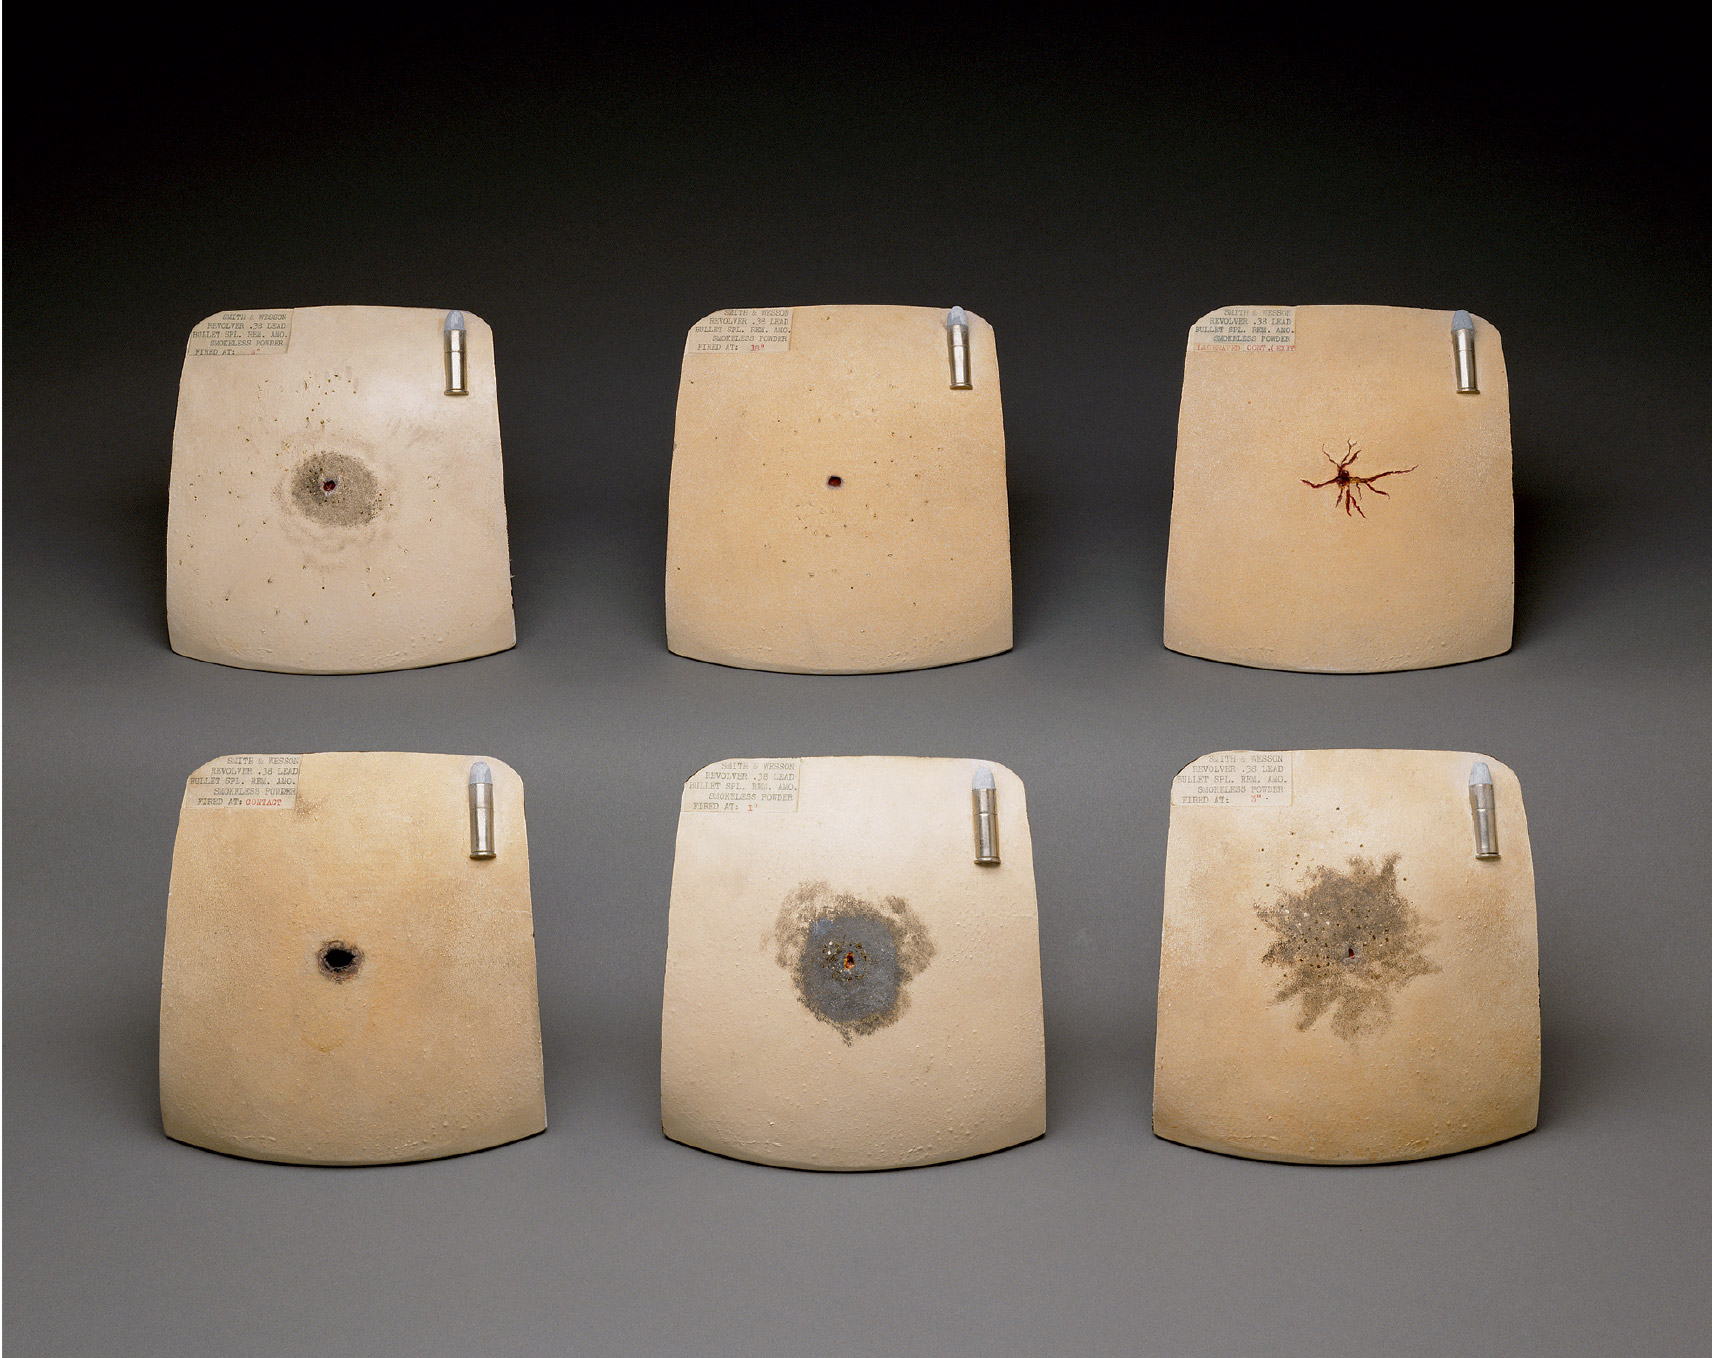 The front of this issue’s postcard which depicts six ceramic chest plates with bullet wounds. 